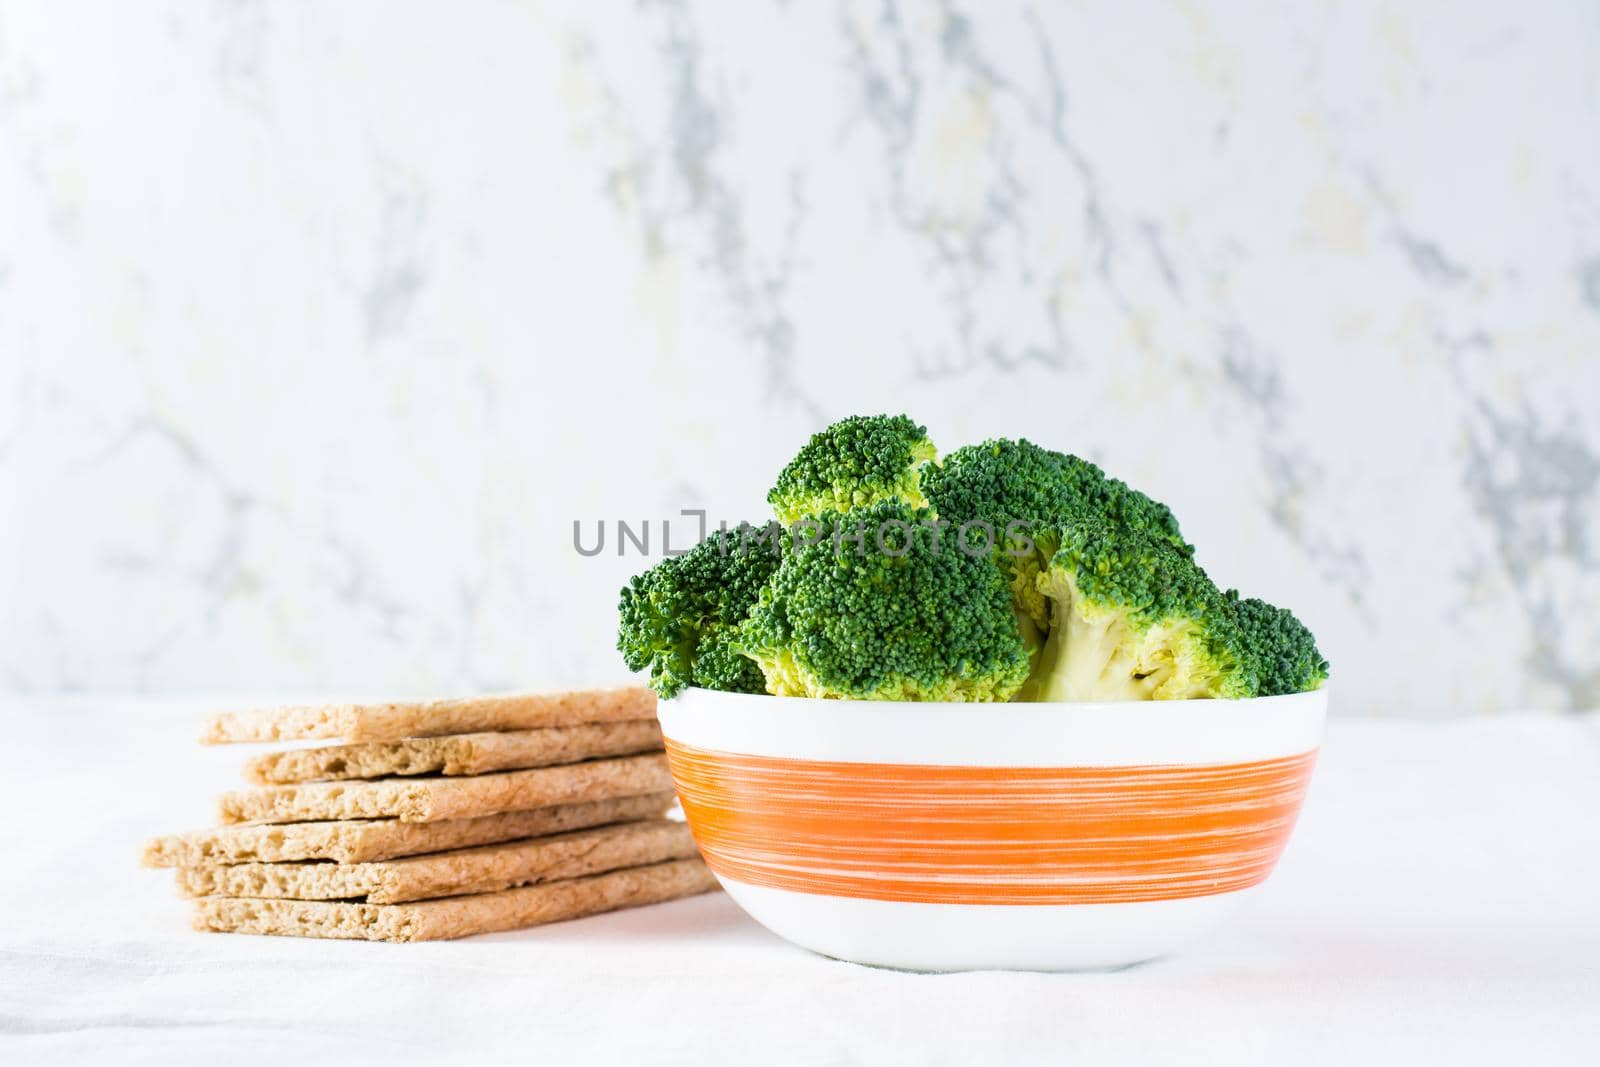 Fresh broccoli in a bowl and grain crispy bread on a table on a cloth. Copy space